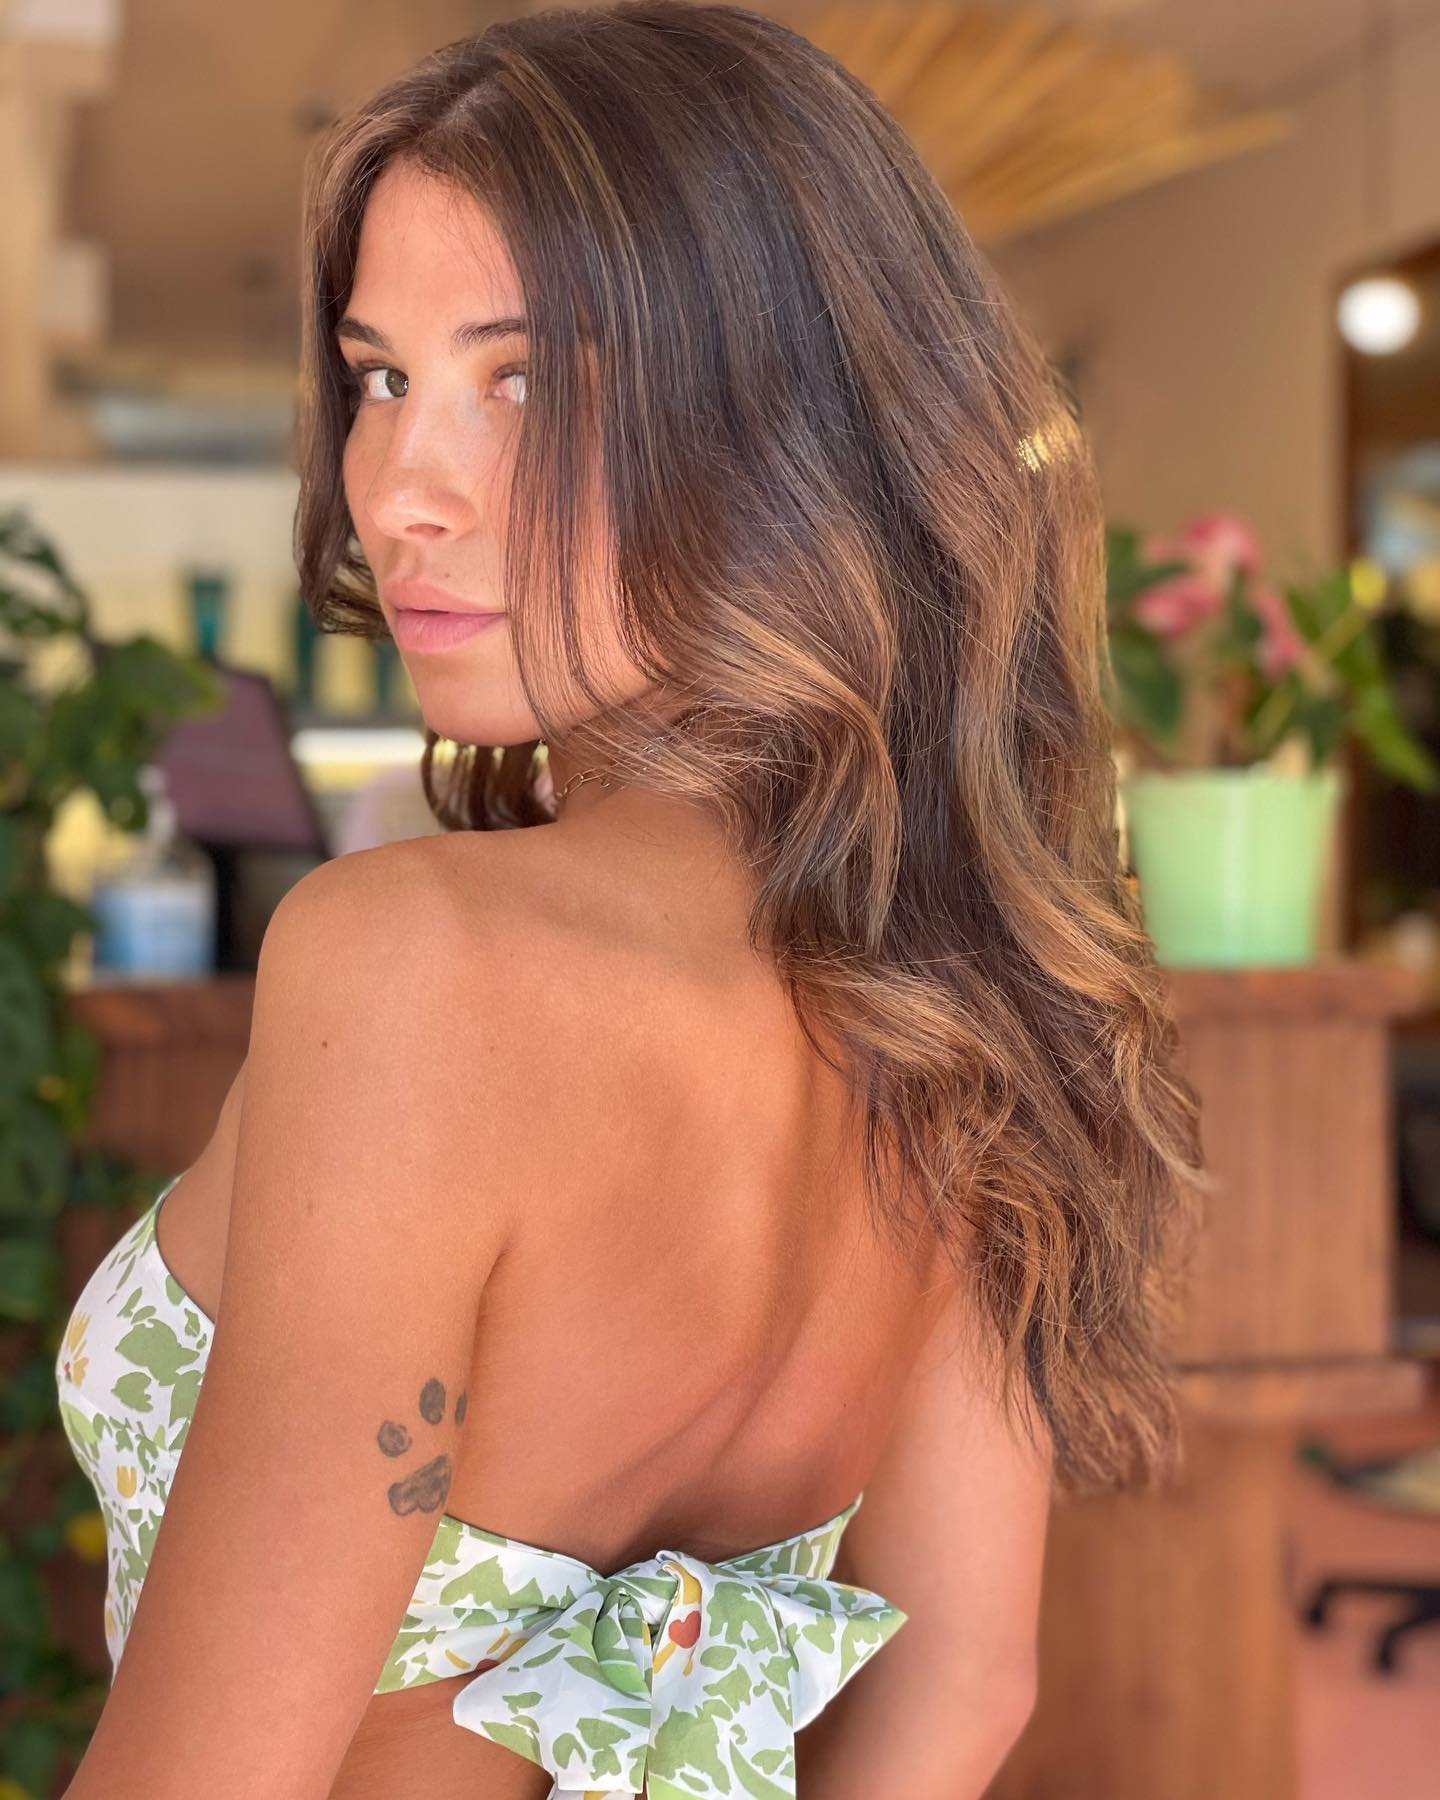 Cut &amp; color refresh for the gorgeous @kristenheh 💕

Are you ready for some spring color? Book our custom color services today! Link in bio ;)

#thepowderroomla #losangelessalon #hairstylist #salon #haircut #haircolorist #losangeles #lahairstylis